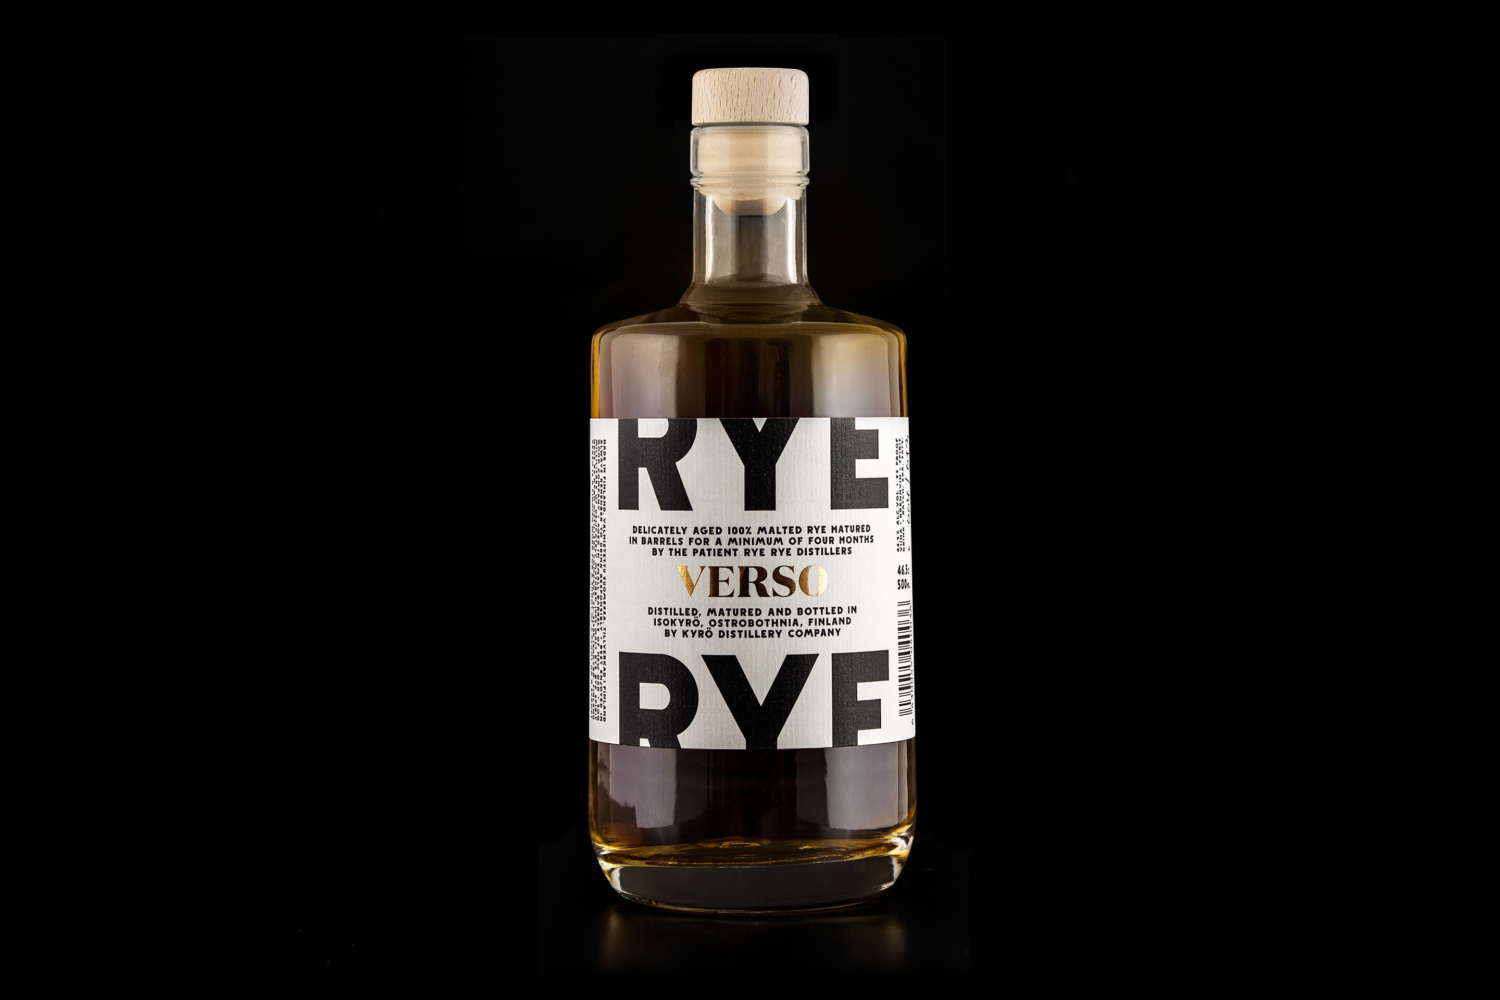 Packaging with laid paper and silver foil detail designed by Werklig for Kyrö Distillery Company